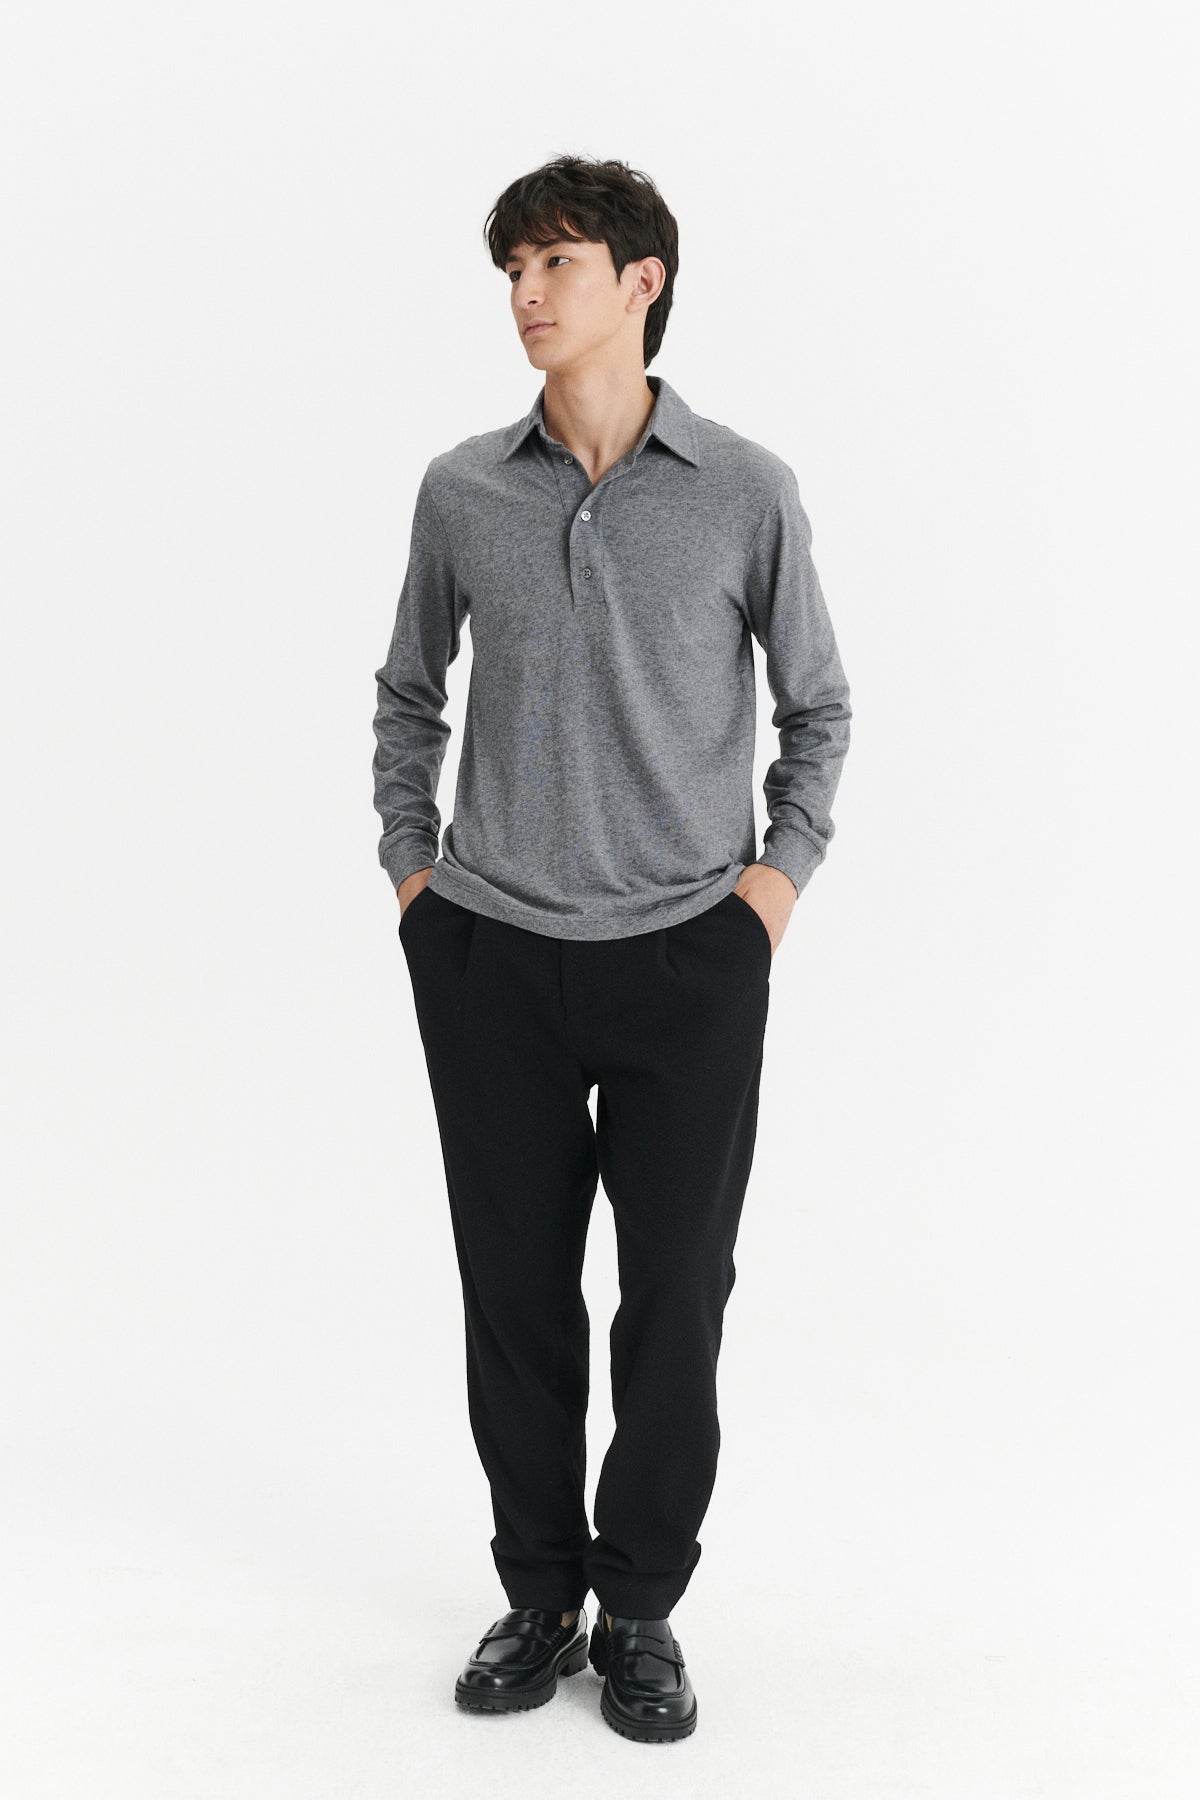 Long Sleeve Polo Shirt in the Finest Dusty Grey Italian Cotton and Cashmere Jersey